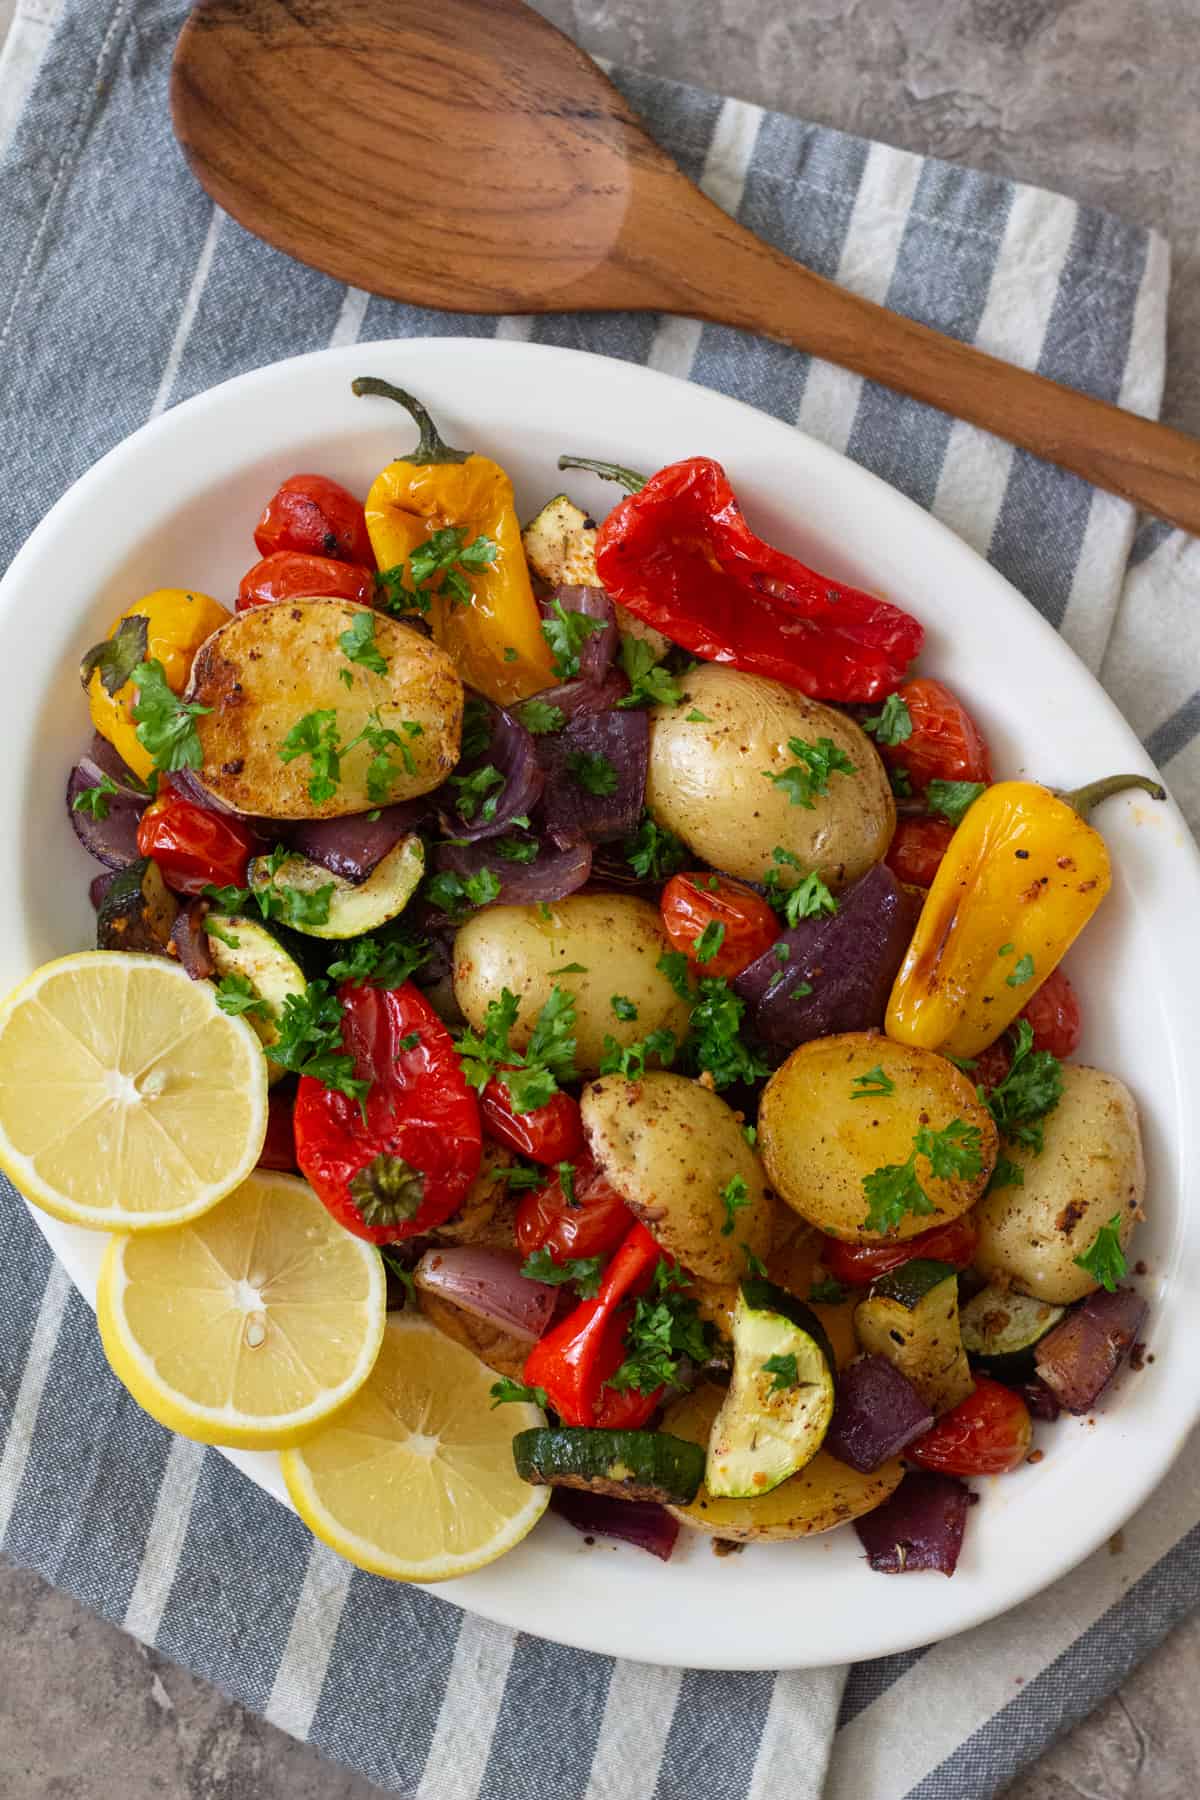 Oven roasted vegetables are a great side dish for almost any meal. Learn how to make tasty roasted vegetables that everyone loves and devours! 